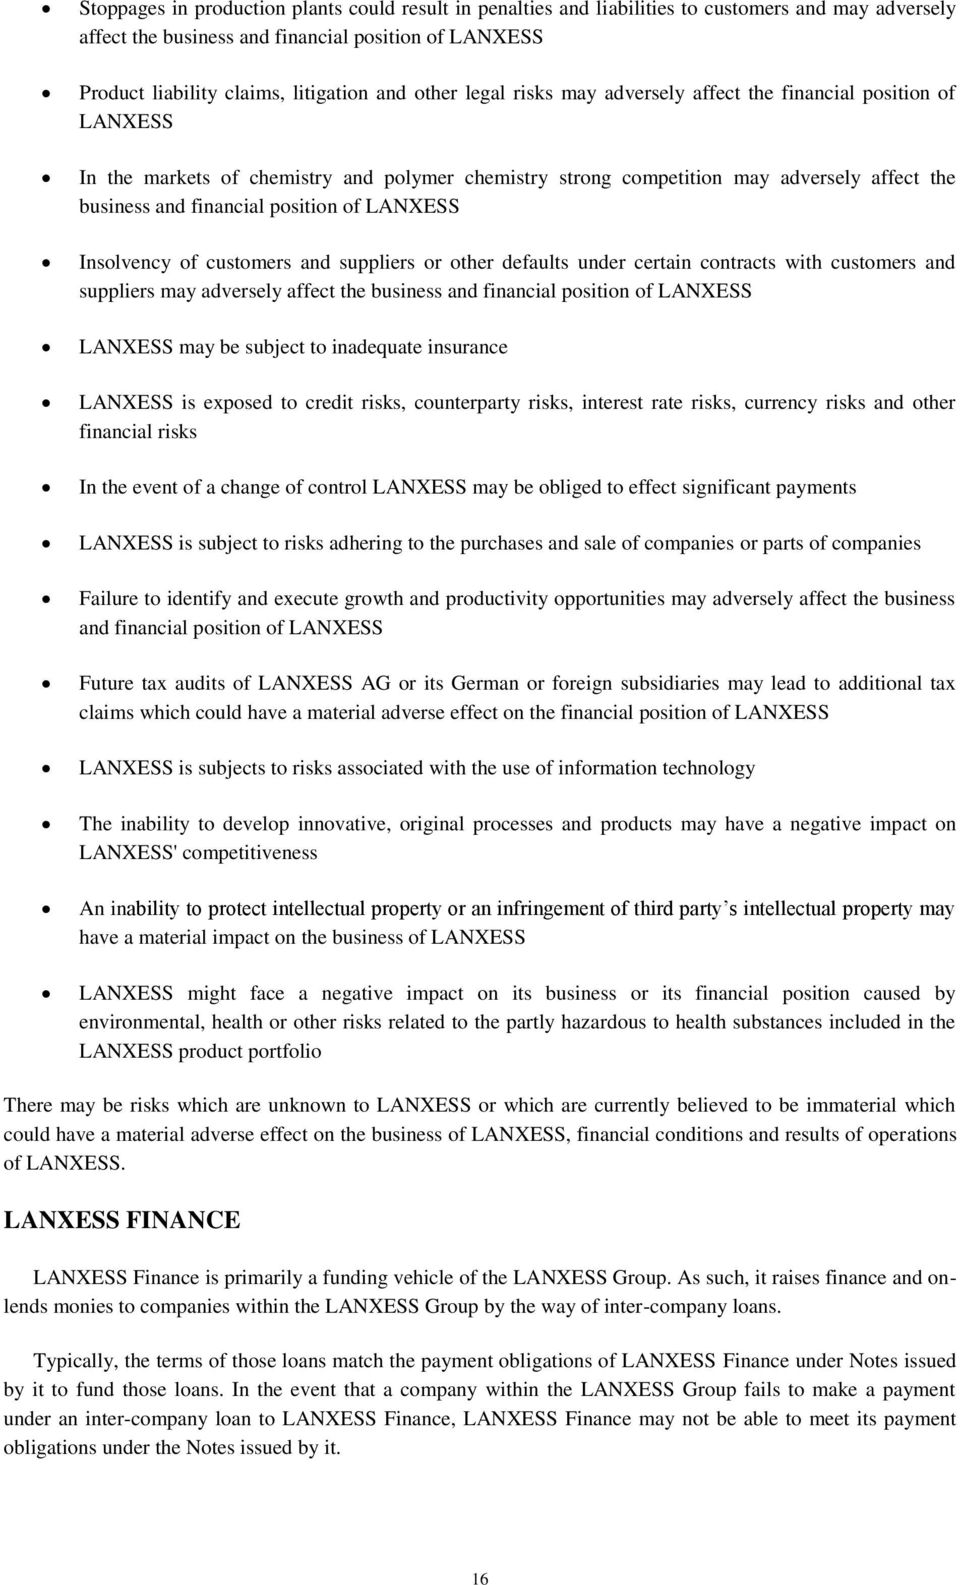 of LANXESS Insolvency of customers and suppliers or other defaults under certain contracts with customers and suppliers may adversely affect the business and financial position of LANXESS LANXESS may